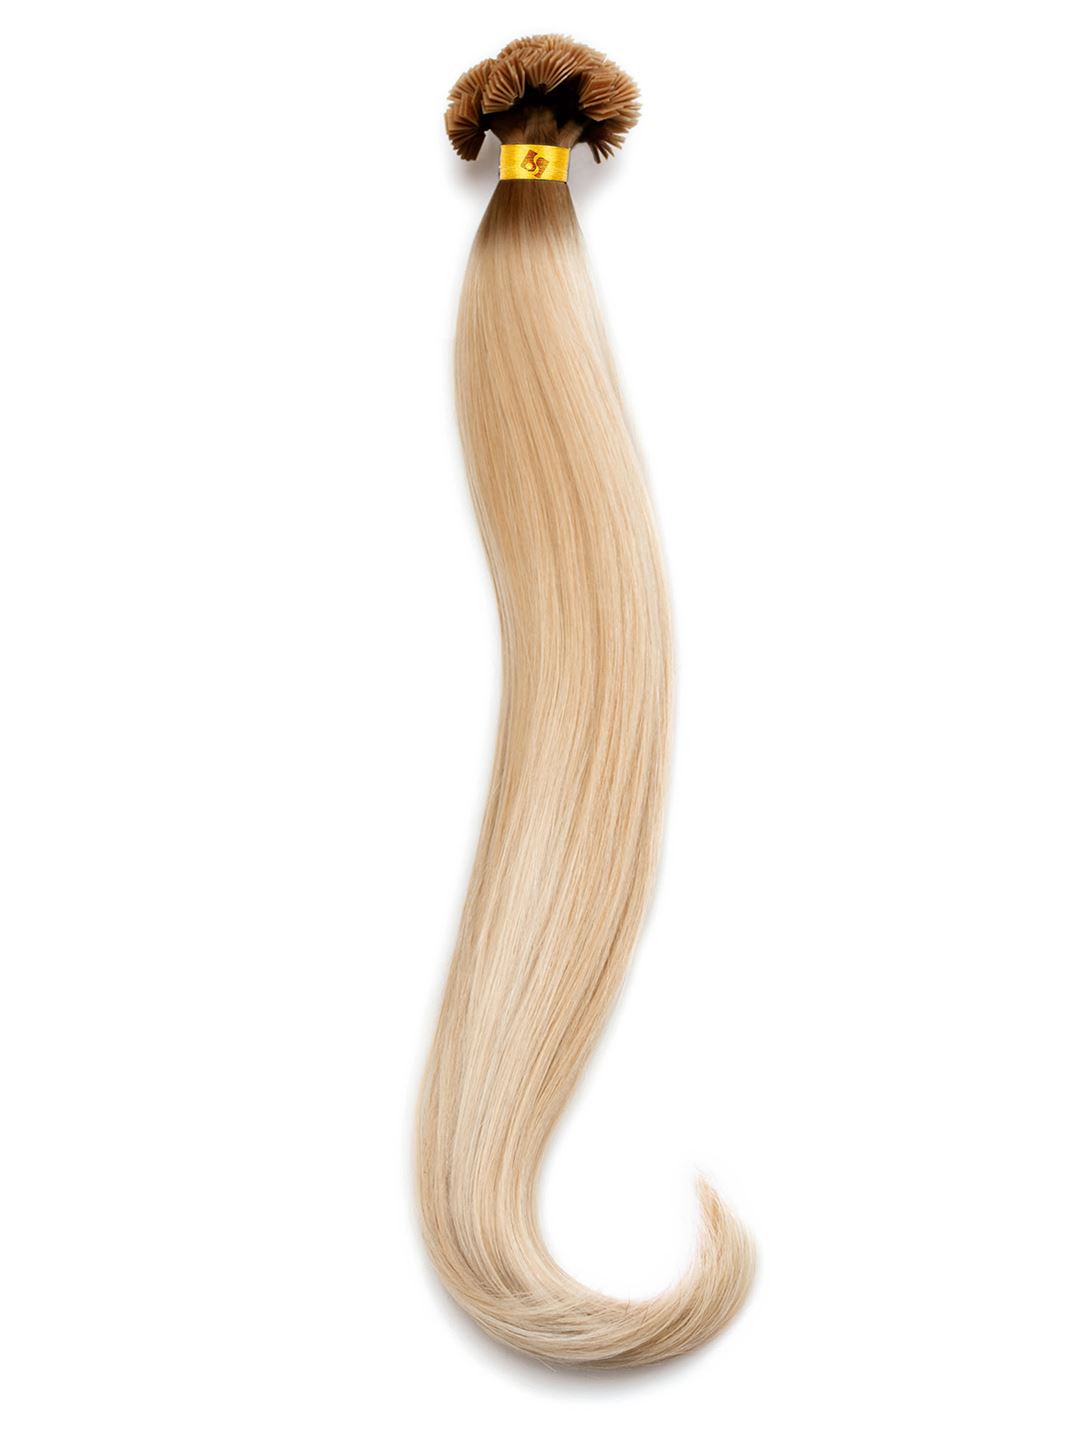 10 Keratin Bonding Extensions - professional Qualität - 55/60cm - rooted hex8018 rl r15/516 variant detail image - f7ff838f05a40ed5d369493c4b2a84f744987c6ec7e23d769abaa581590c2655